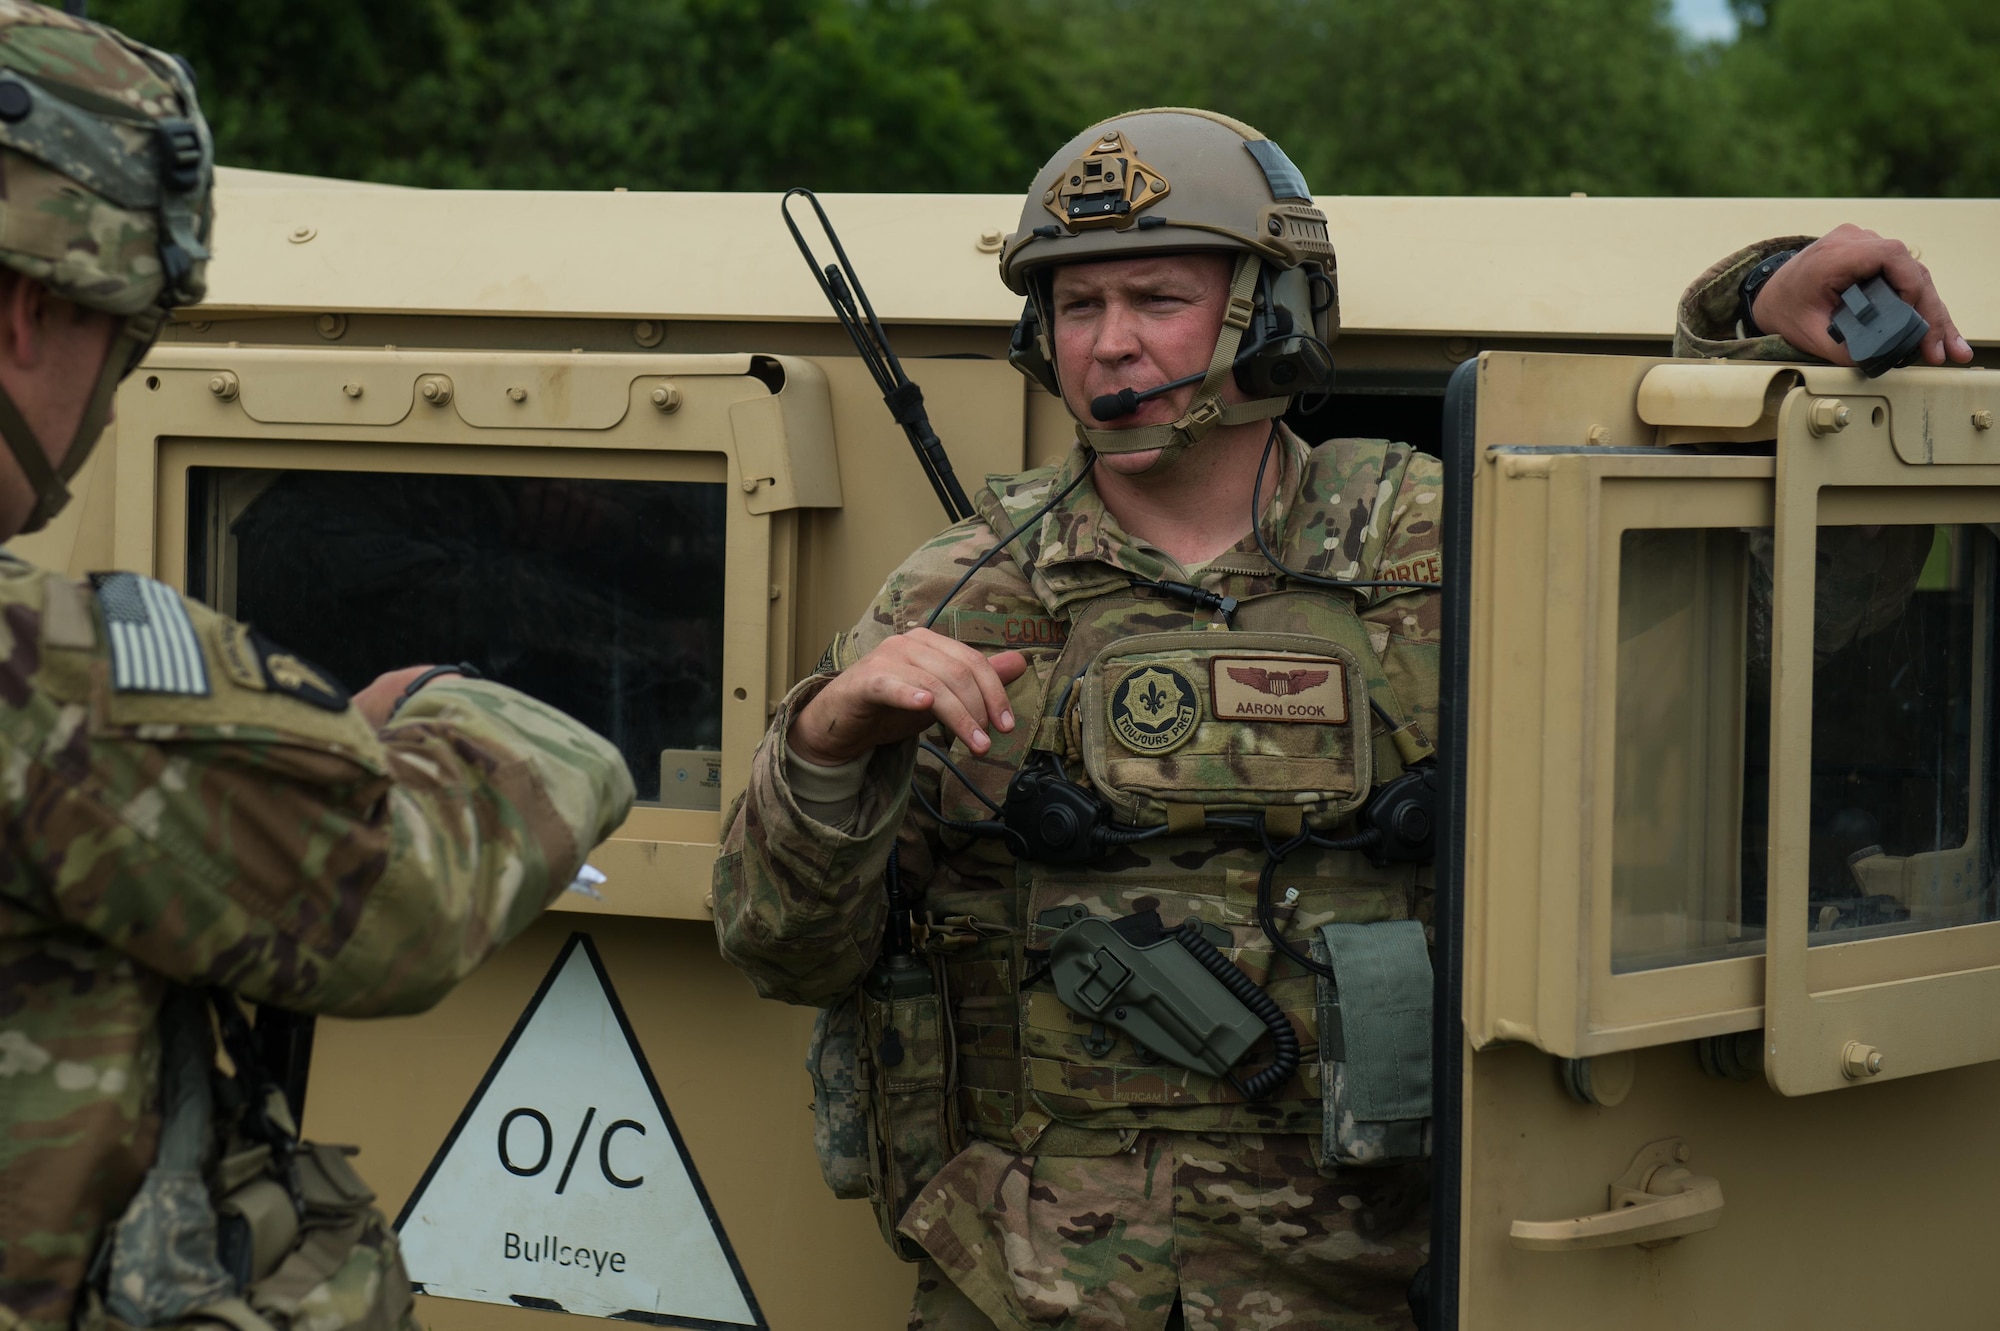 U.S. Air Force Maj. Aaron Cook, 621st Mobility Support Operations Squadron Air Mobility Liaison Officer to the 2nd Cavalry Regiment/Joint Multinational Training Center, speaks with a Soldier assigned to the 82nd Airborne Division during Exercise Swift Response 16 at Hohenfels Training Area, Germany, June 16, 2016. Exercise SR16 is one of the premier military crisis response training events for multinational airborne forces in the world, the exercise has more than 5,000 participants from 10 NATO nations. (U.S. Air Force photo by Master Sgt. Joseph Swafford/Released) 